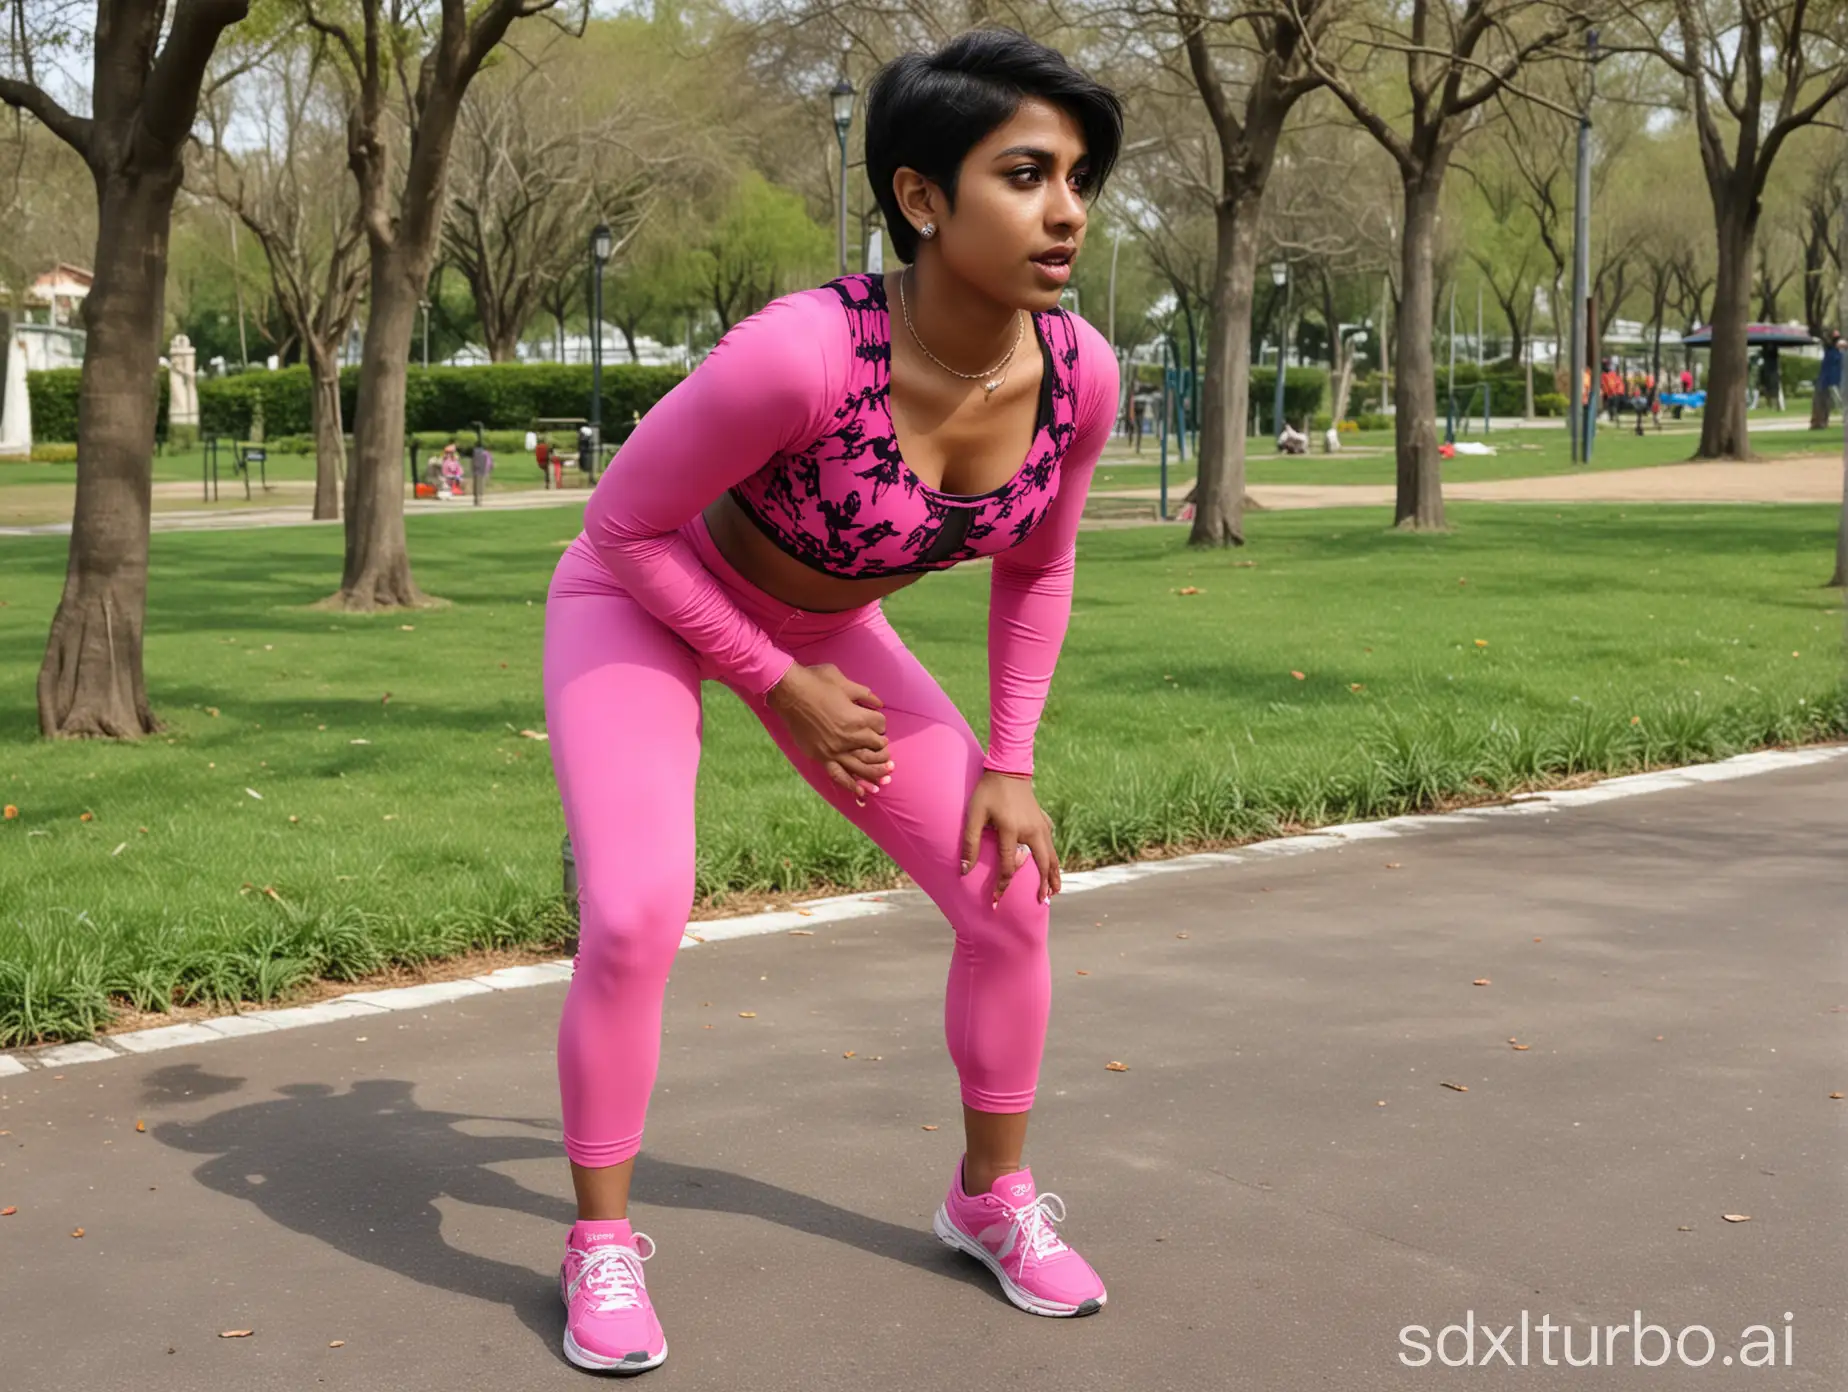 south indian, 30s, femboy, short hair, sissy, cross dresser , chastity cage , big butt, sports bra, tight leggings, pink outfit, crowded public park, back view , doing squats